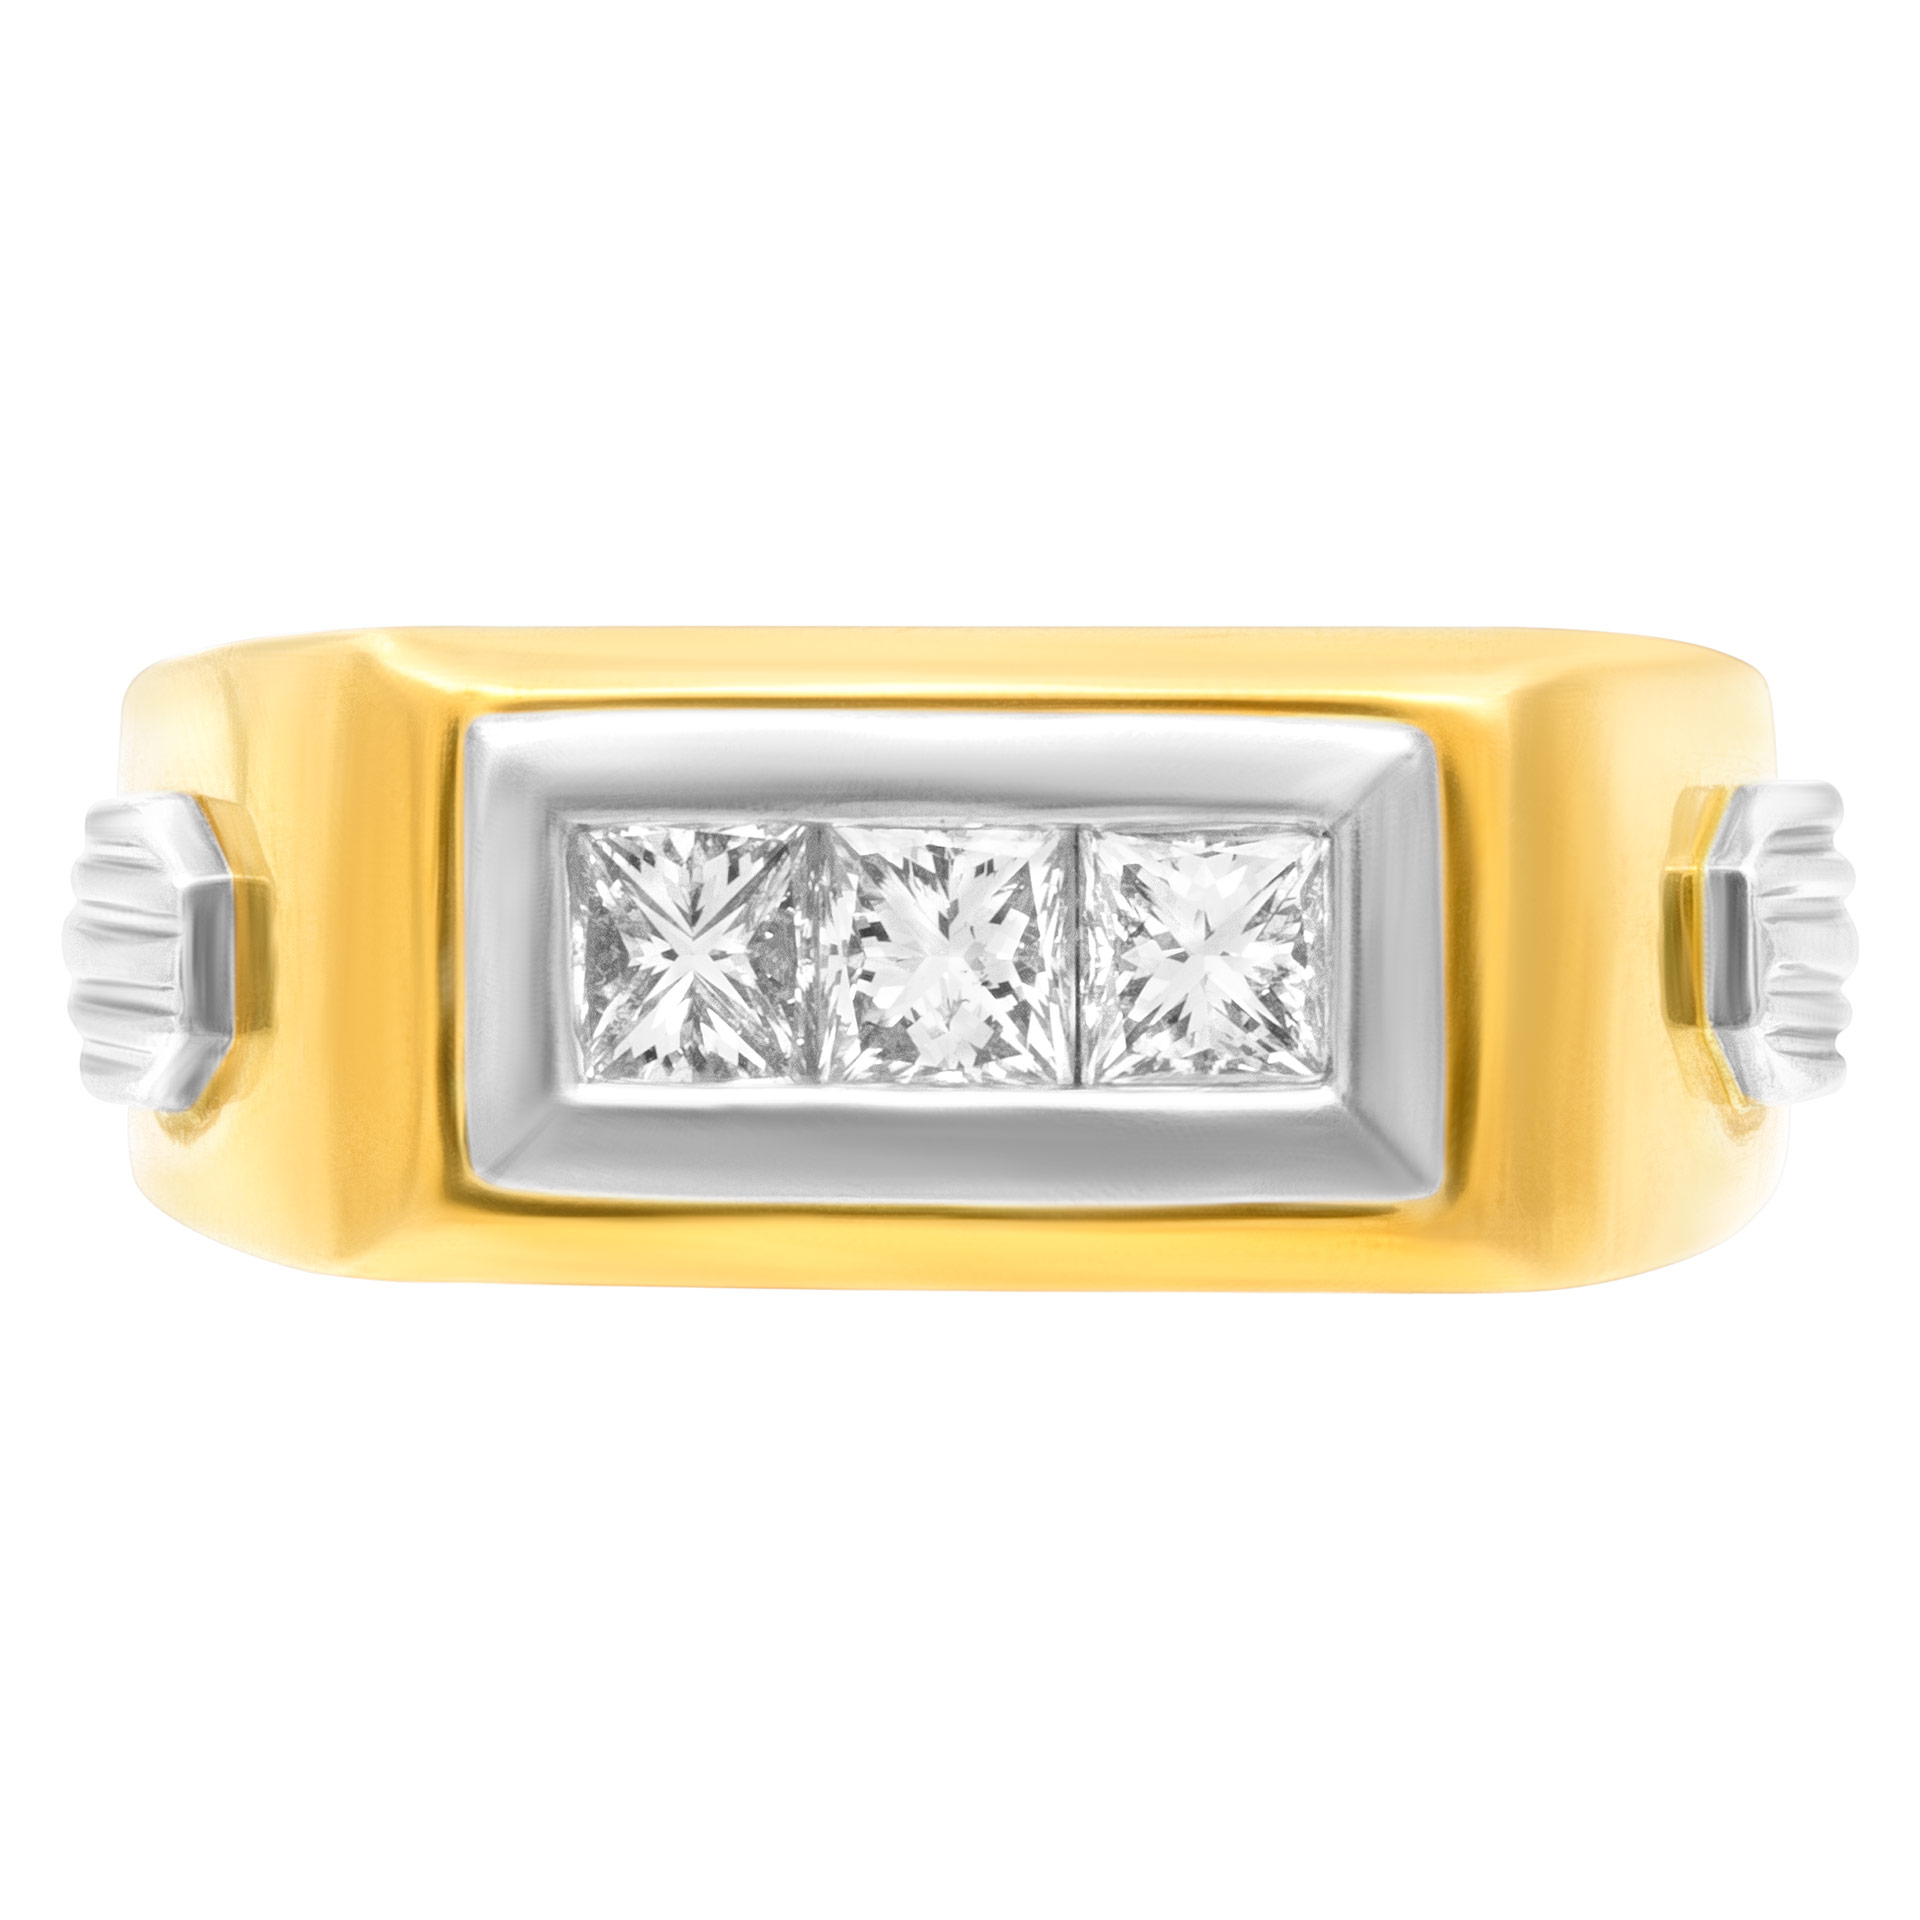 Diamond band in 18k gold with 0.75 carat (I-J color, SI clarity) image 1